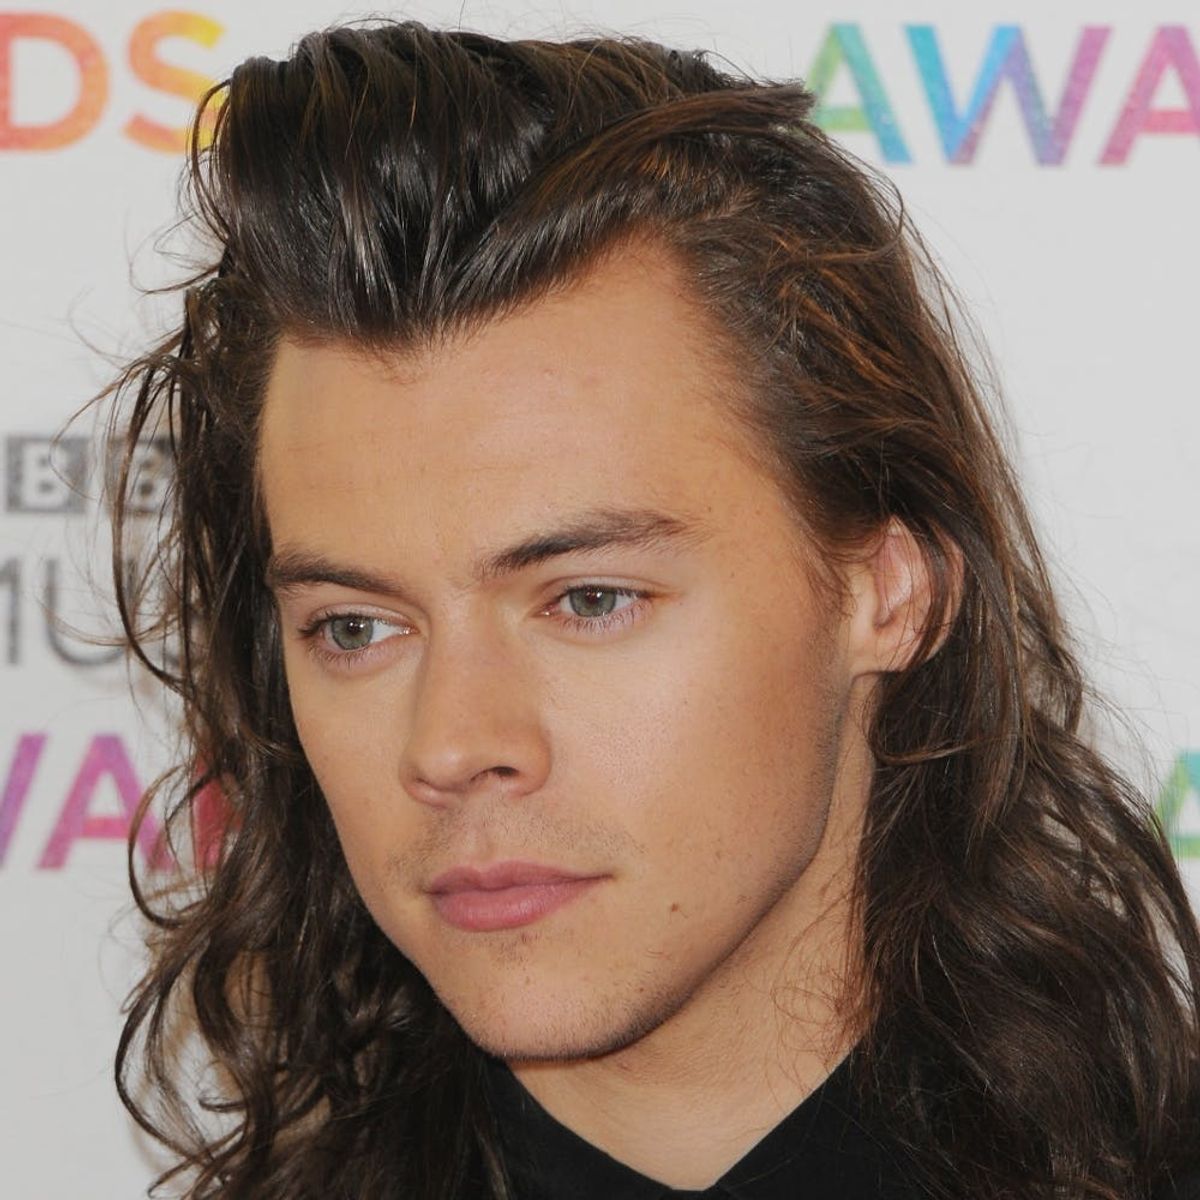 Harry Styles Just Announced a Totally Unexpected New Gig